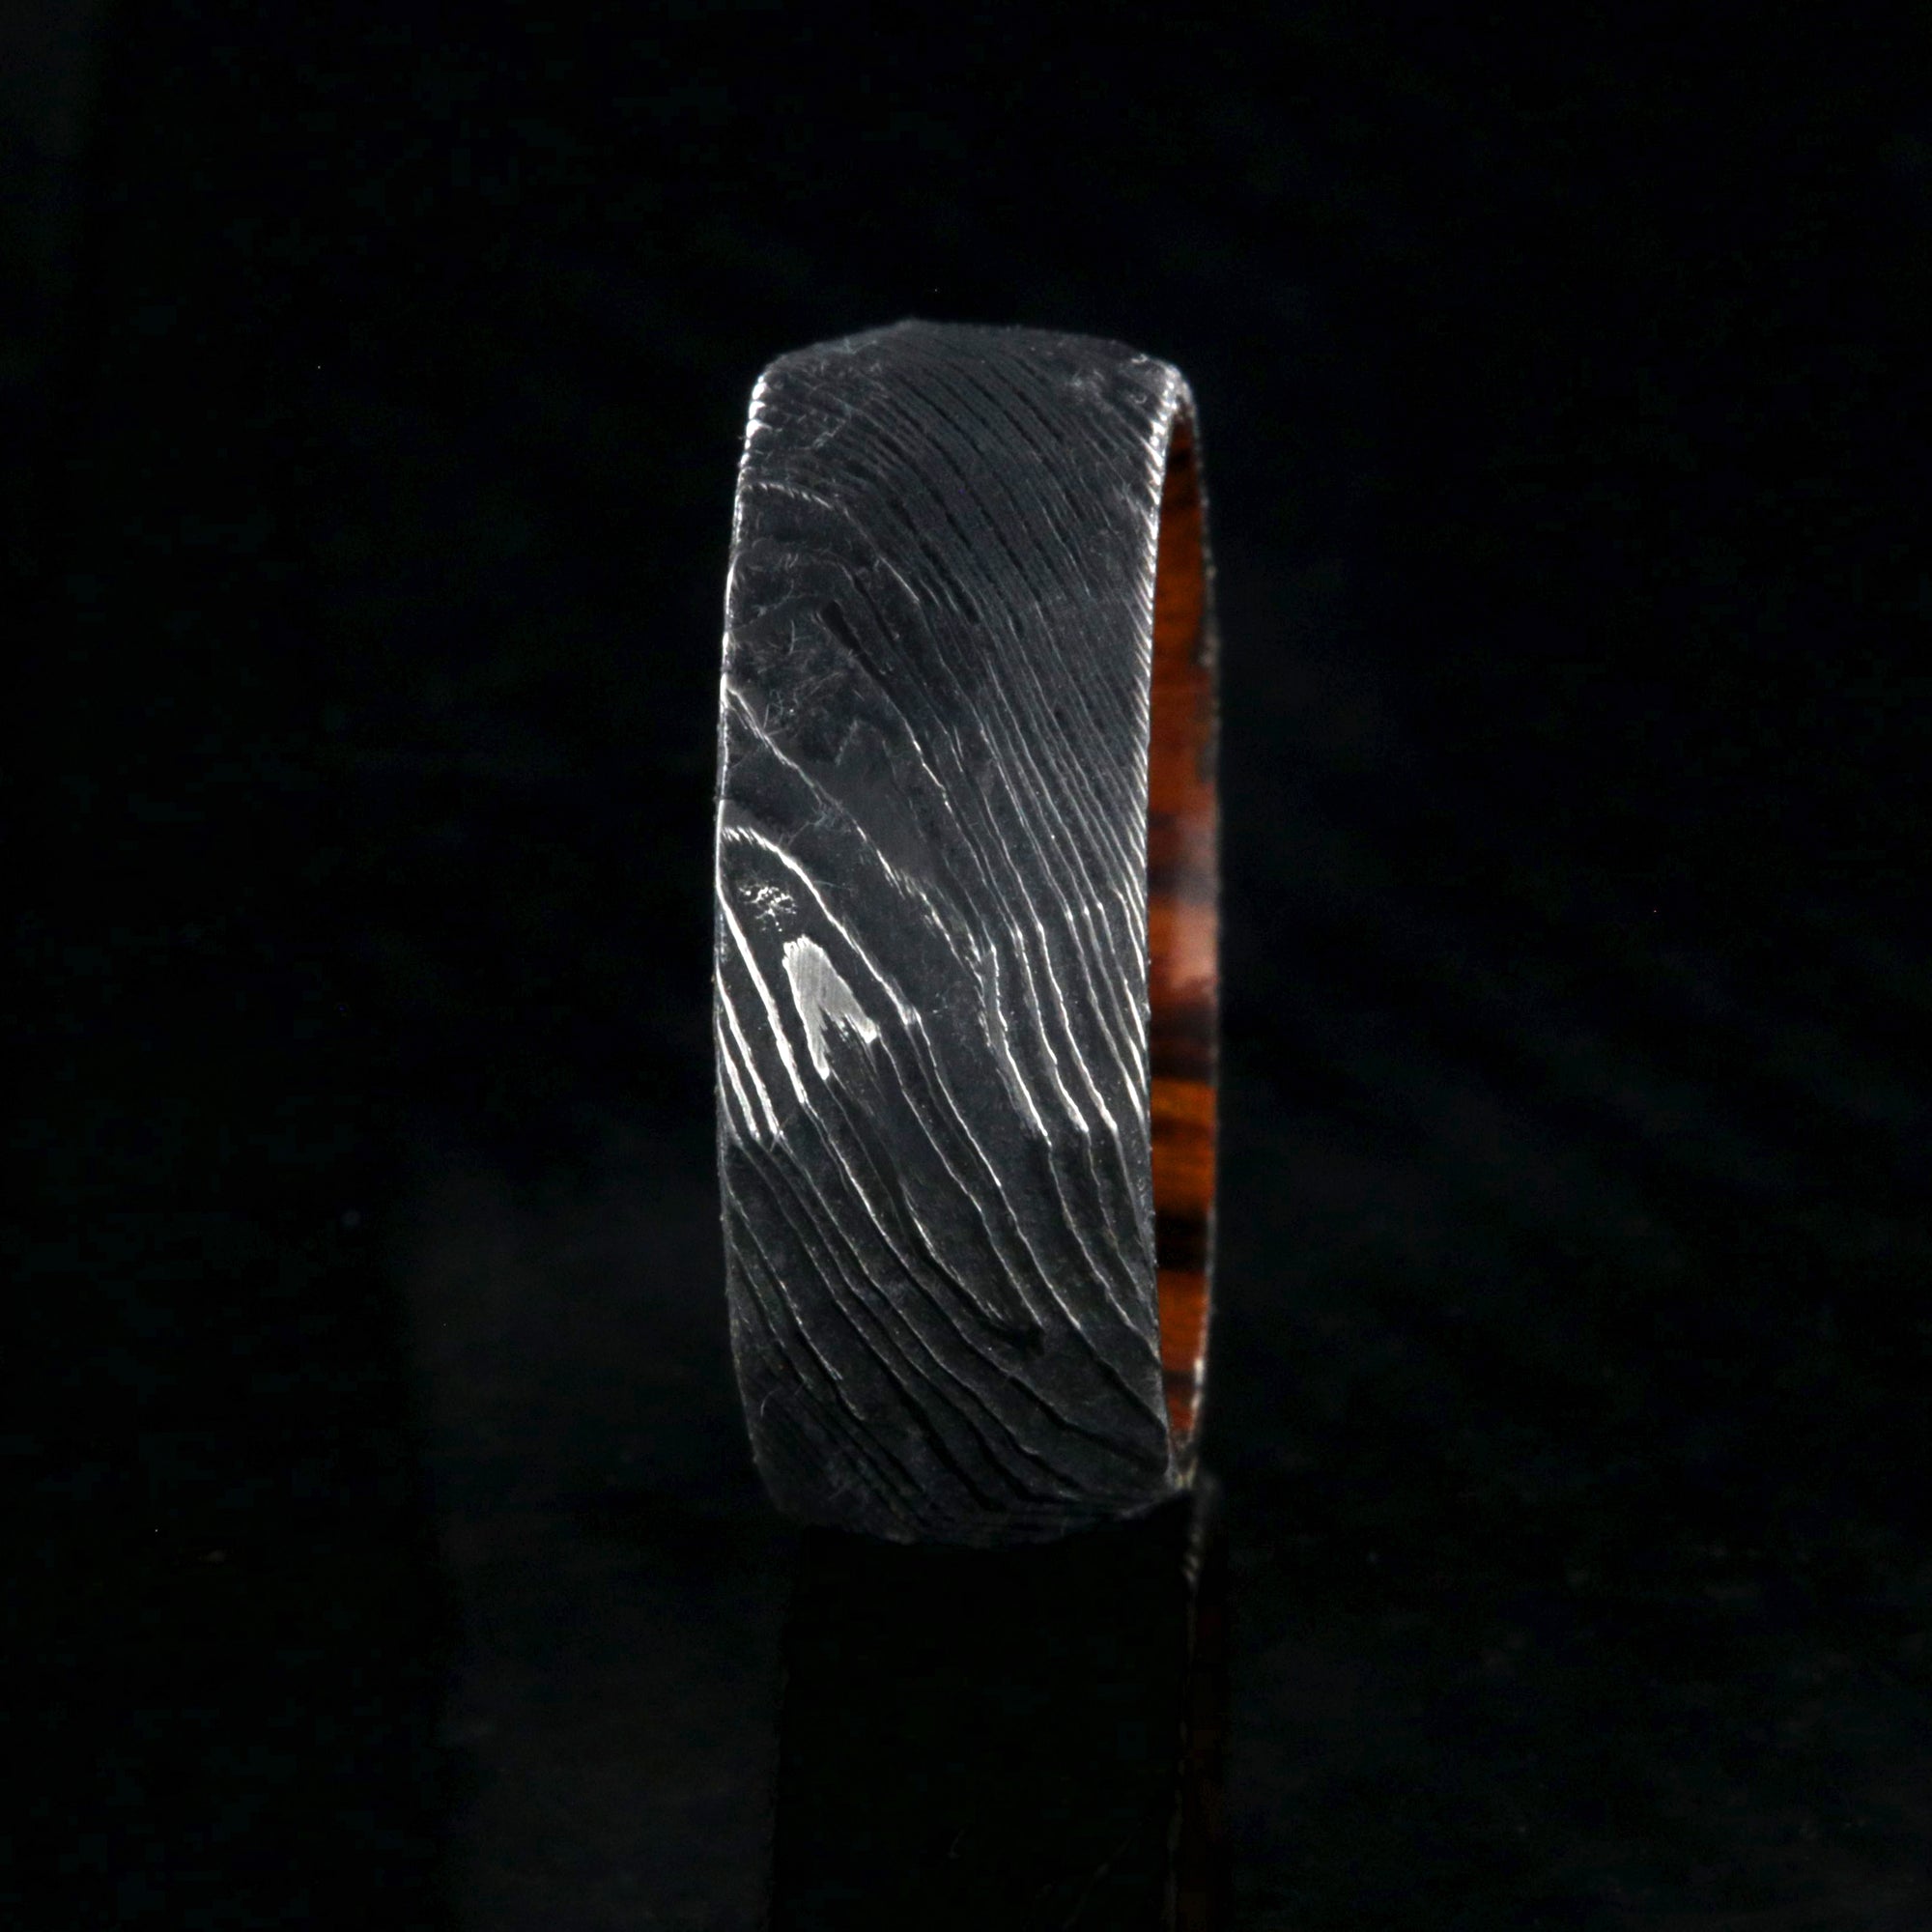 8mm wide black Damascus steel men's wedding band with an Arizona ironwood sleeve and hammered band finish